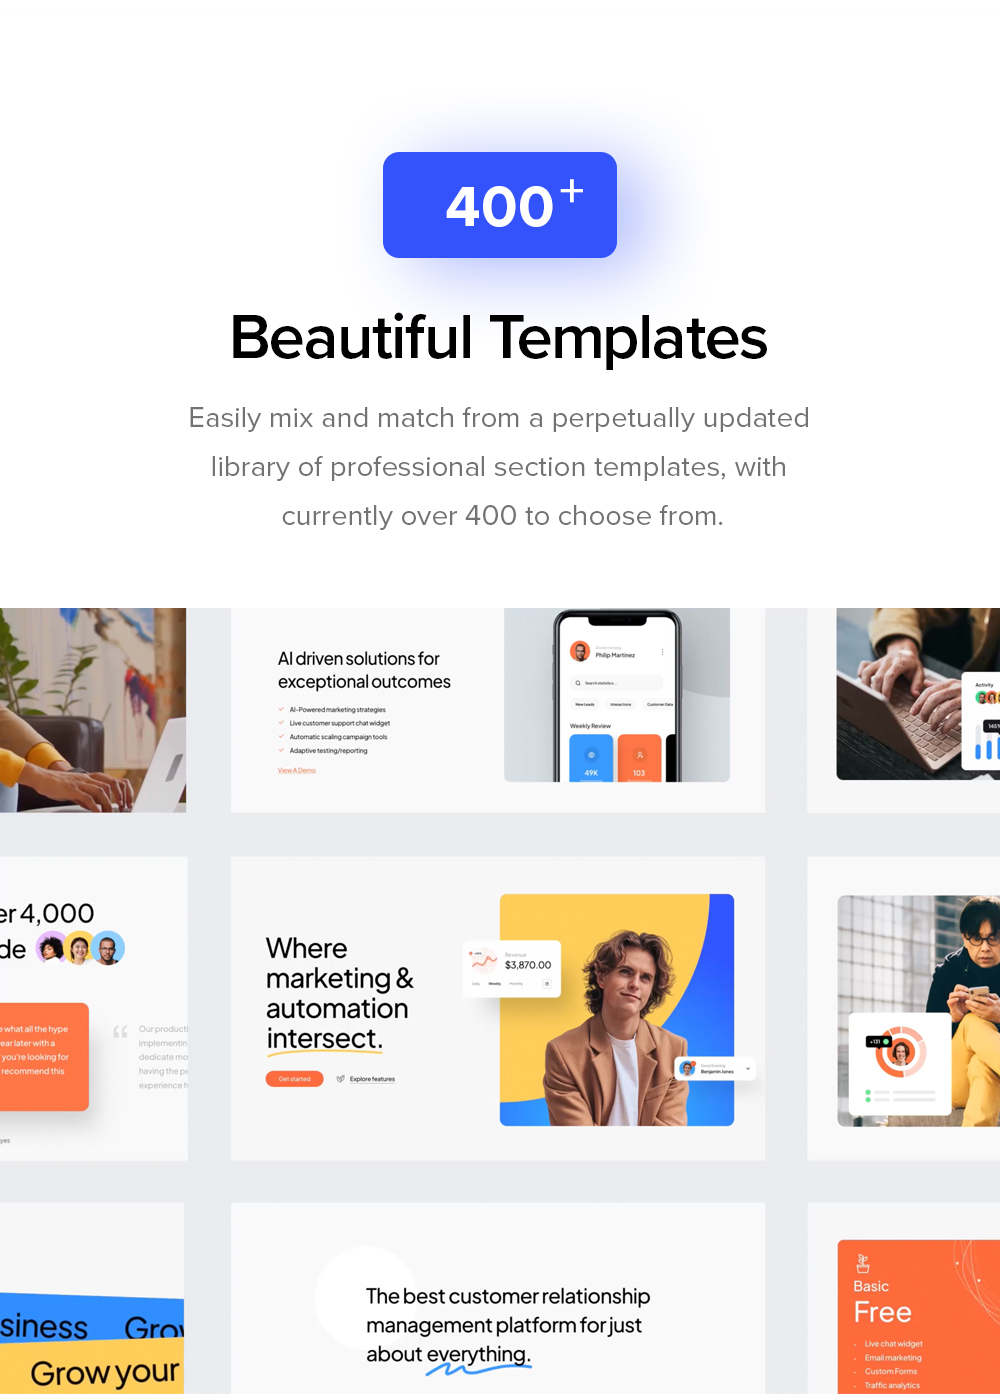 Beautiful templates for sites.